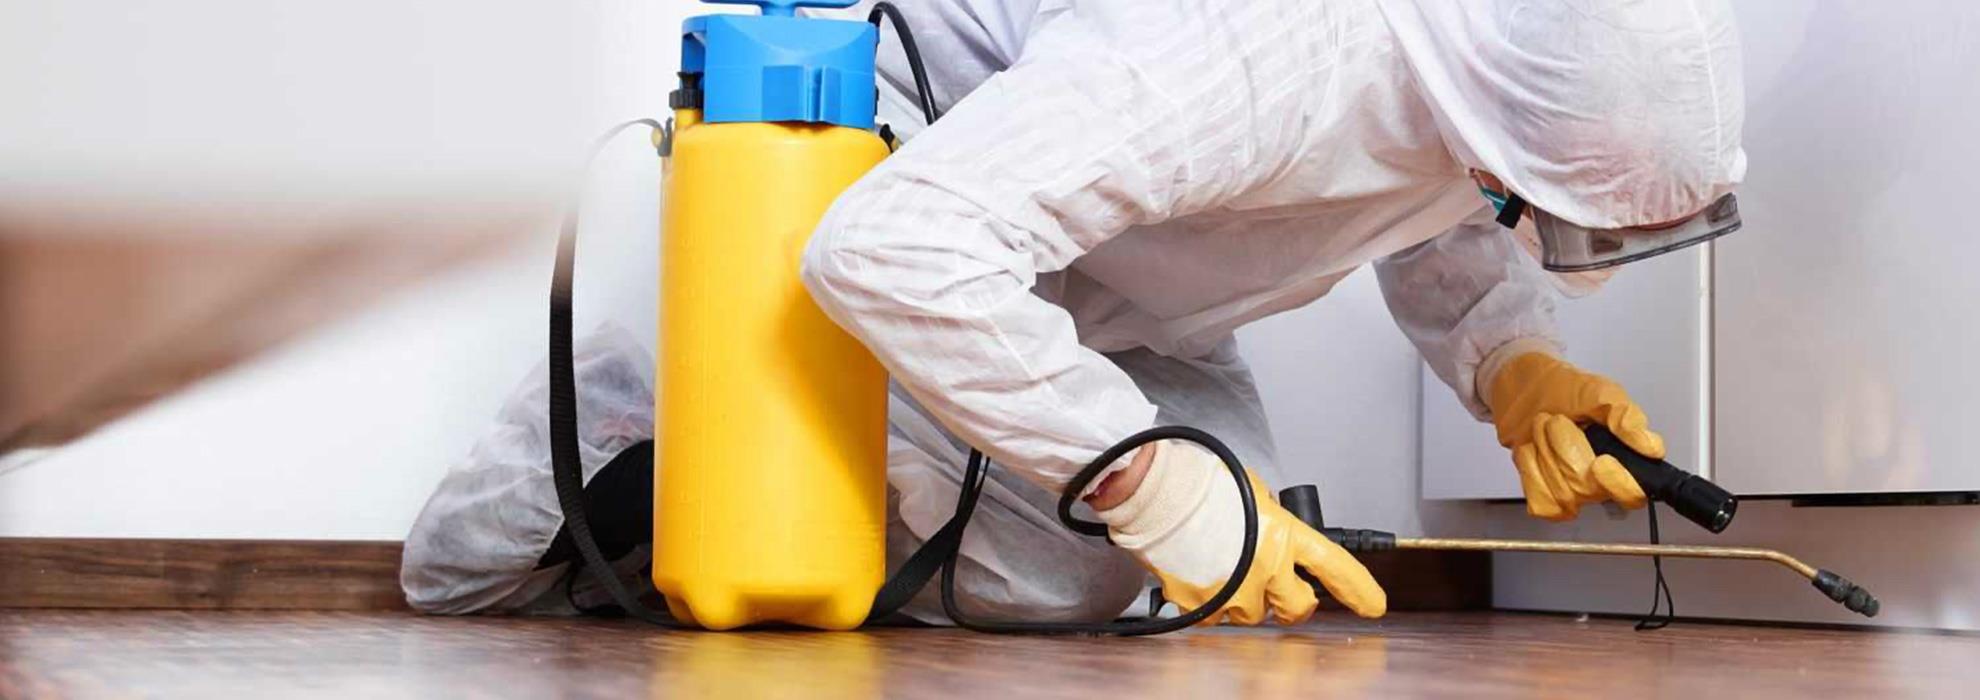 TSD pest control services will help you eliminate all pest problems